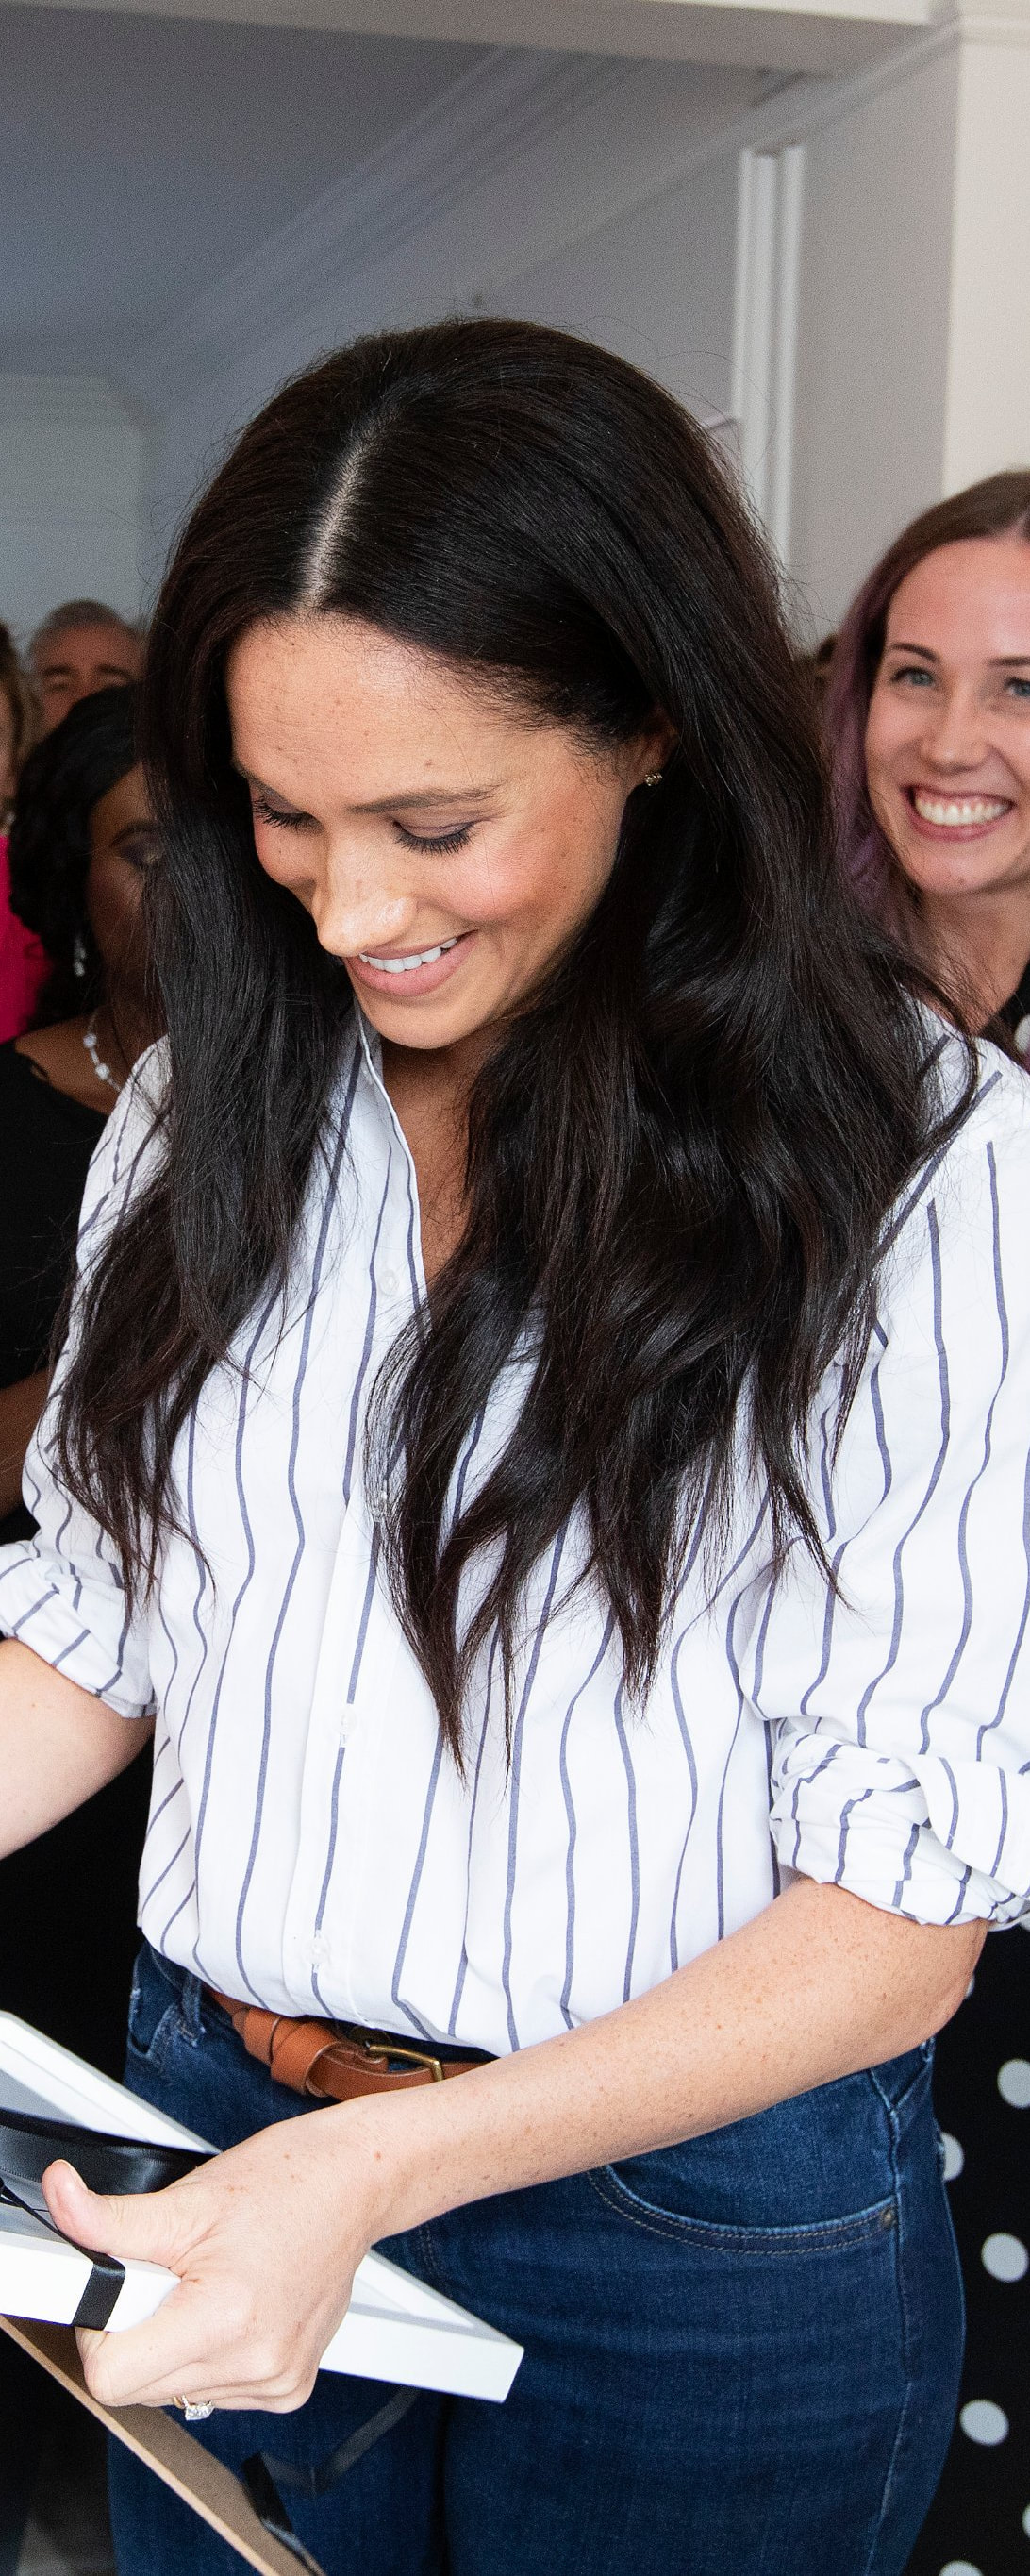 Madewell English Saddle Leather Crisscross Skinny Belt as seen on Meghan Markle, The Duchess of Sussex